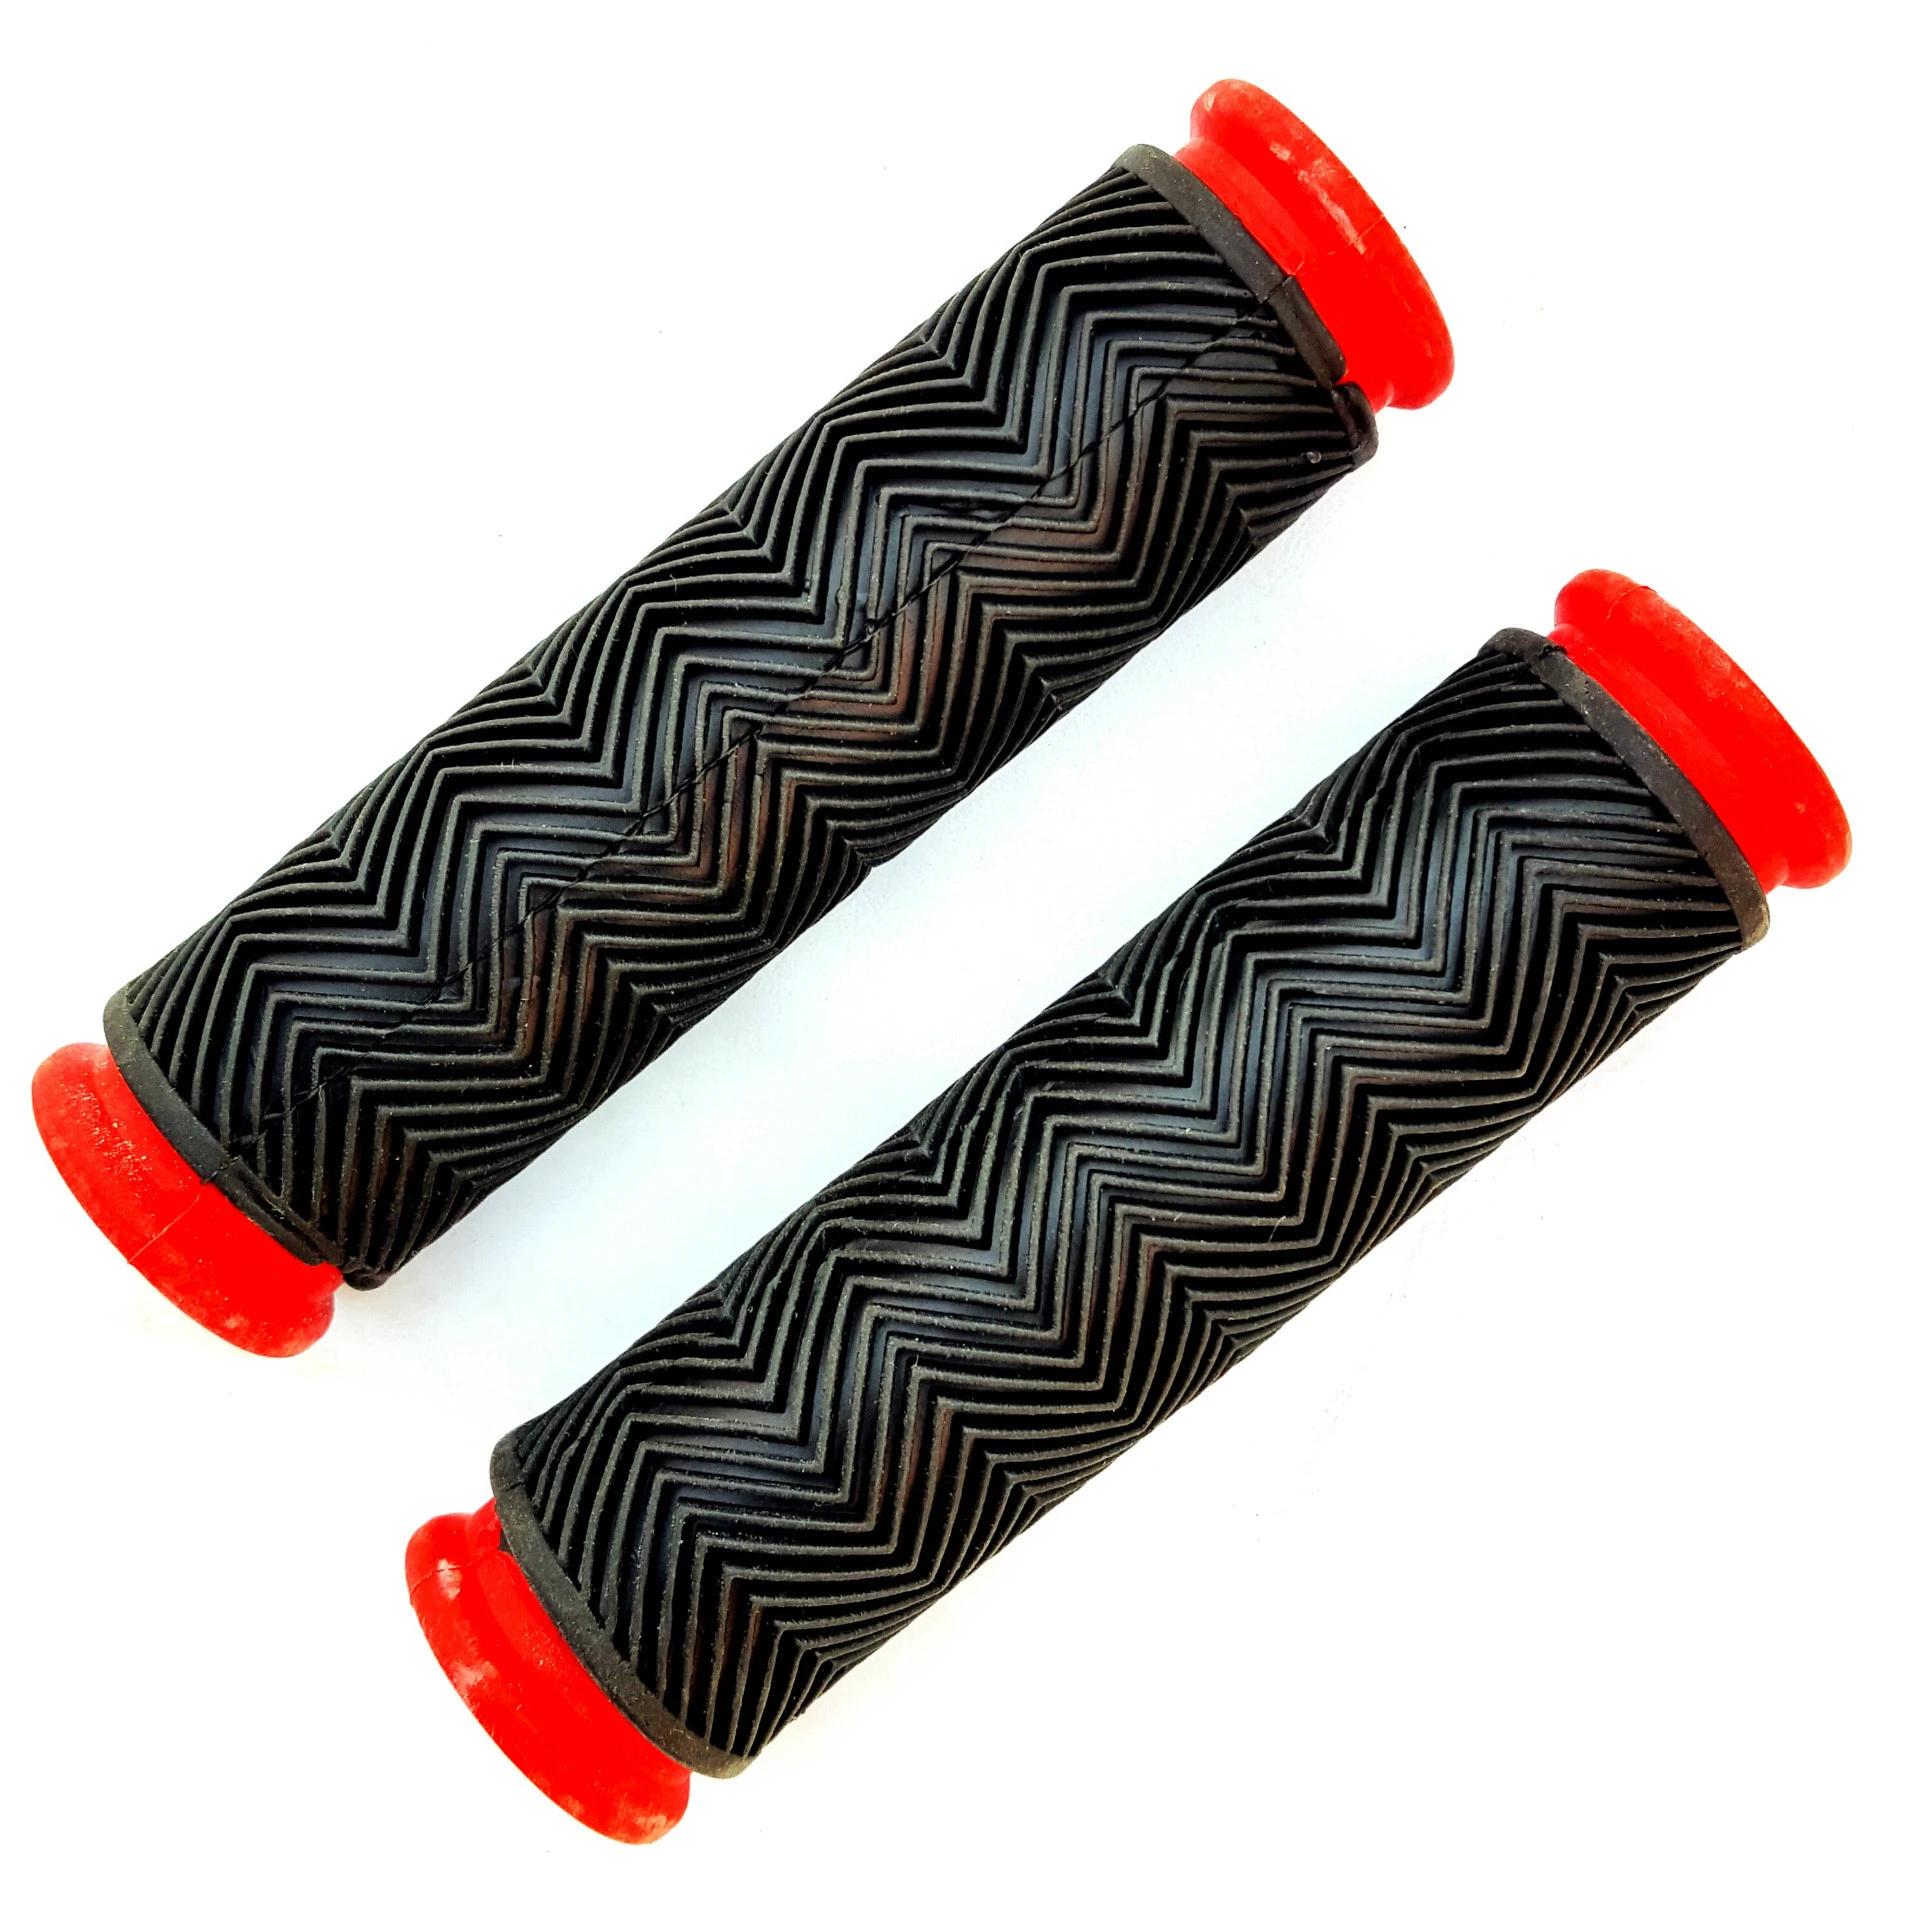 Bicycle Two-color Car Dead Fly Grip Rubber Shockproof Anti-skid Grip Bicycle Handlebar Grips